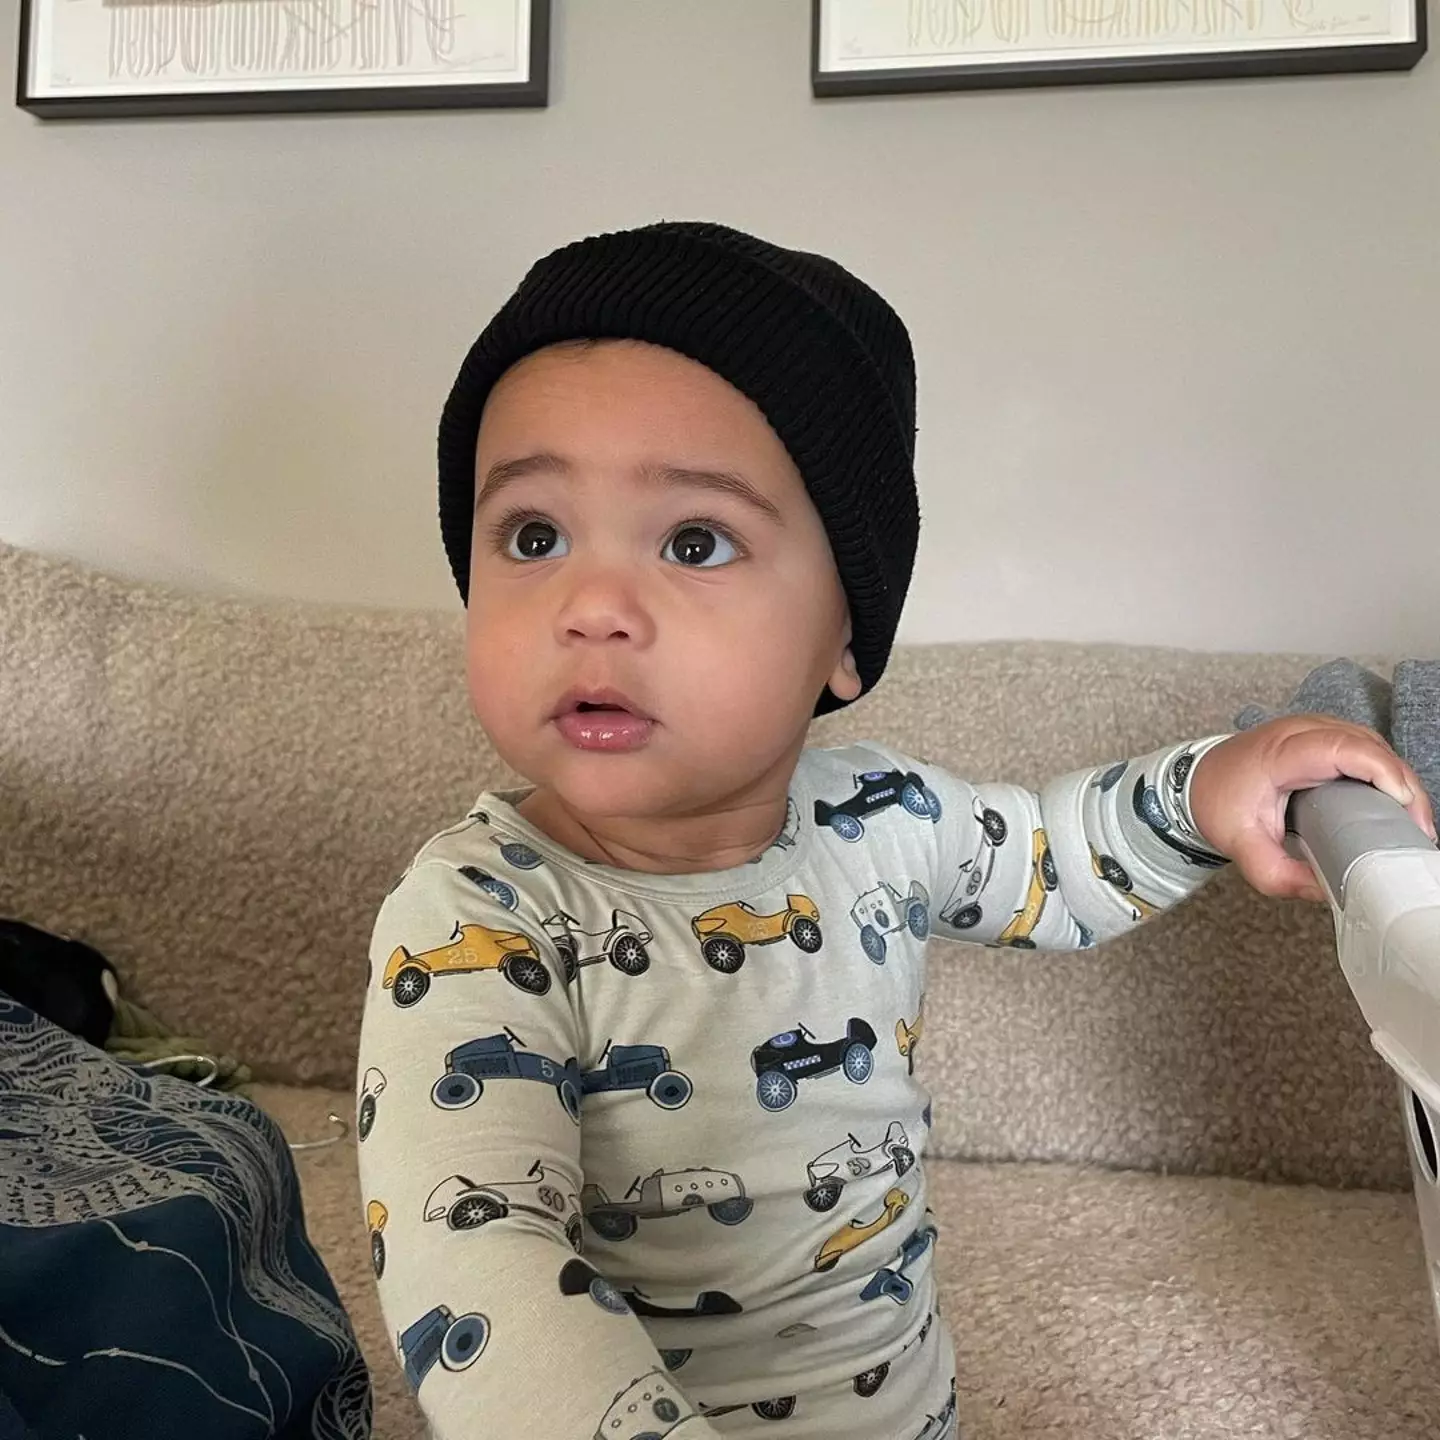 Kylie shared the first full pictures of her son's face earlier this year.